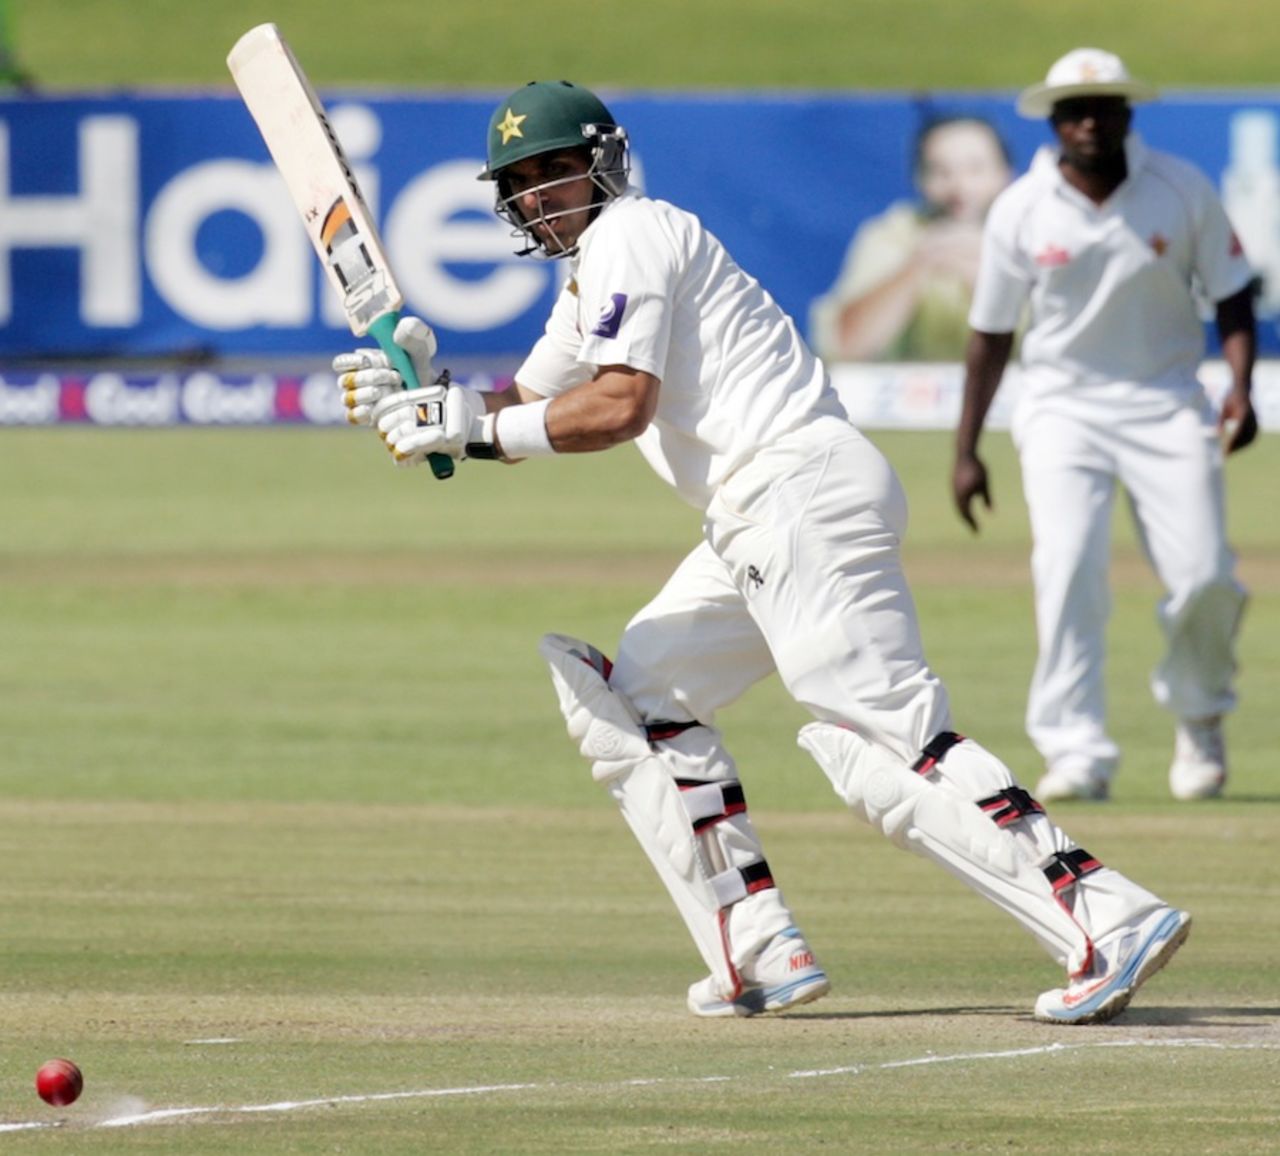 Misbah-ul-Haq sends one on the leg side, Zimbabwe v Pakistan, 1st Test, 3rd day, Harare, September 5, 2013